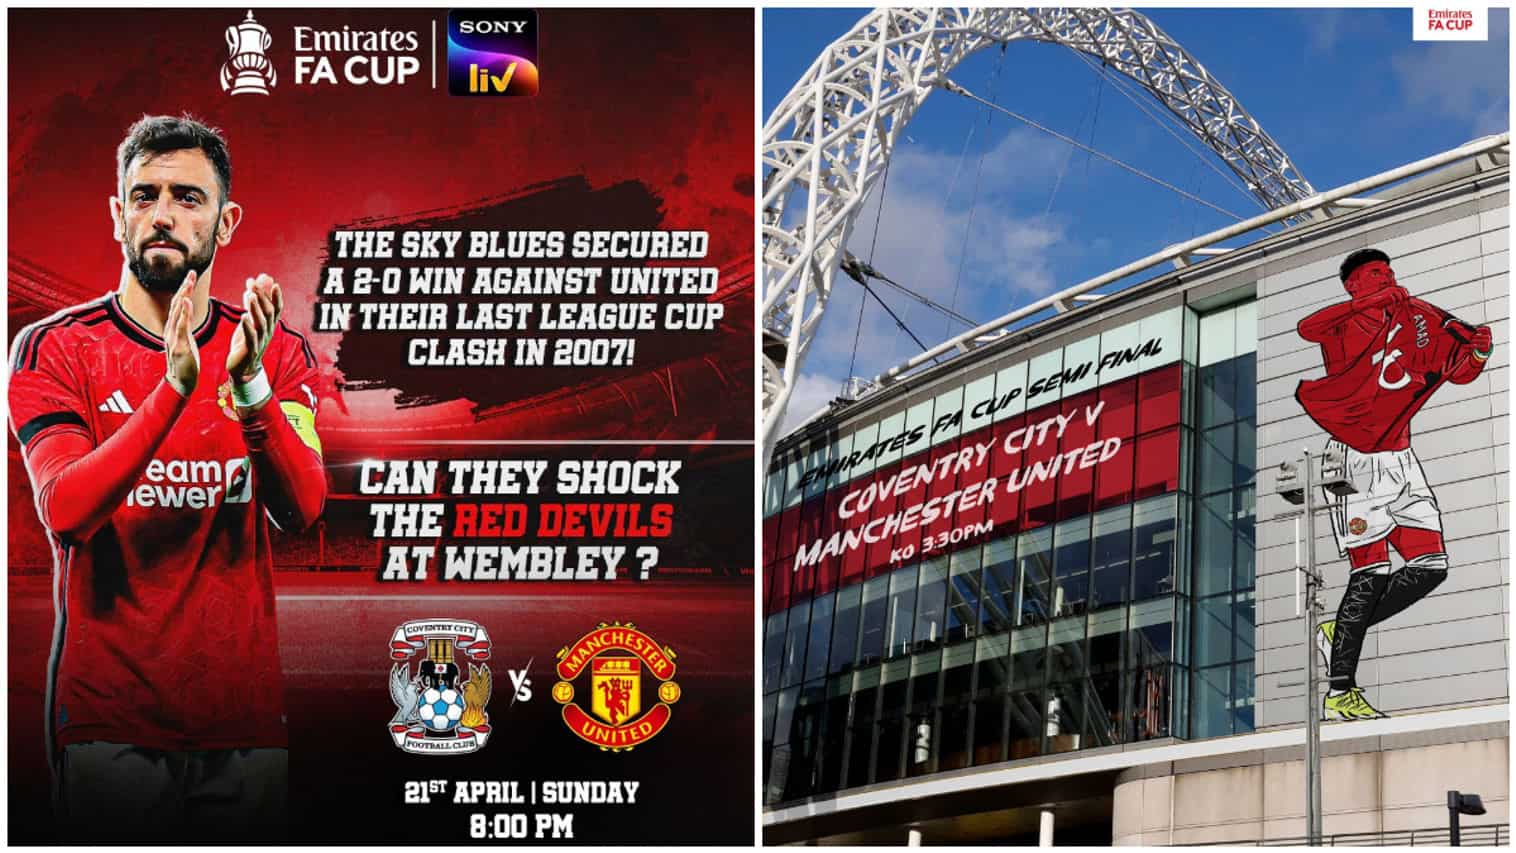 https://www.mobilemasala.com/sports/FA-Cup-Semi-Final-on-OTT-When-where-and-how-to-watch-Coventry-City-Football-Club-Vs-Manchester-United-FC-i256289